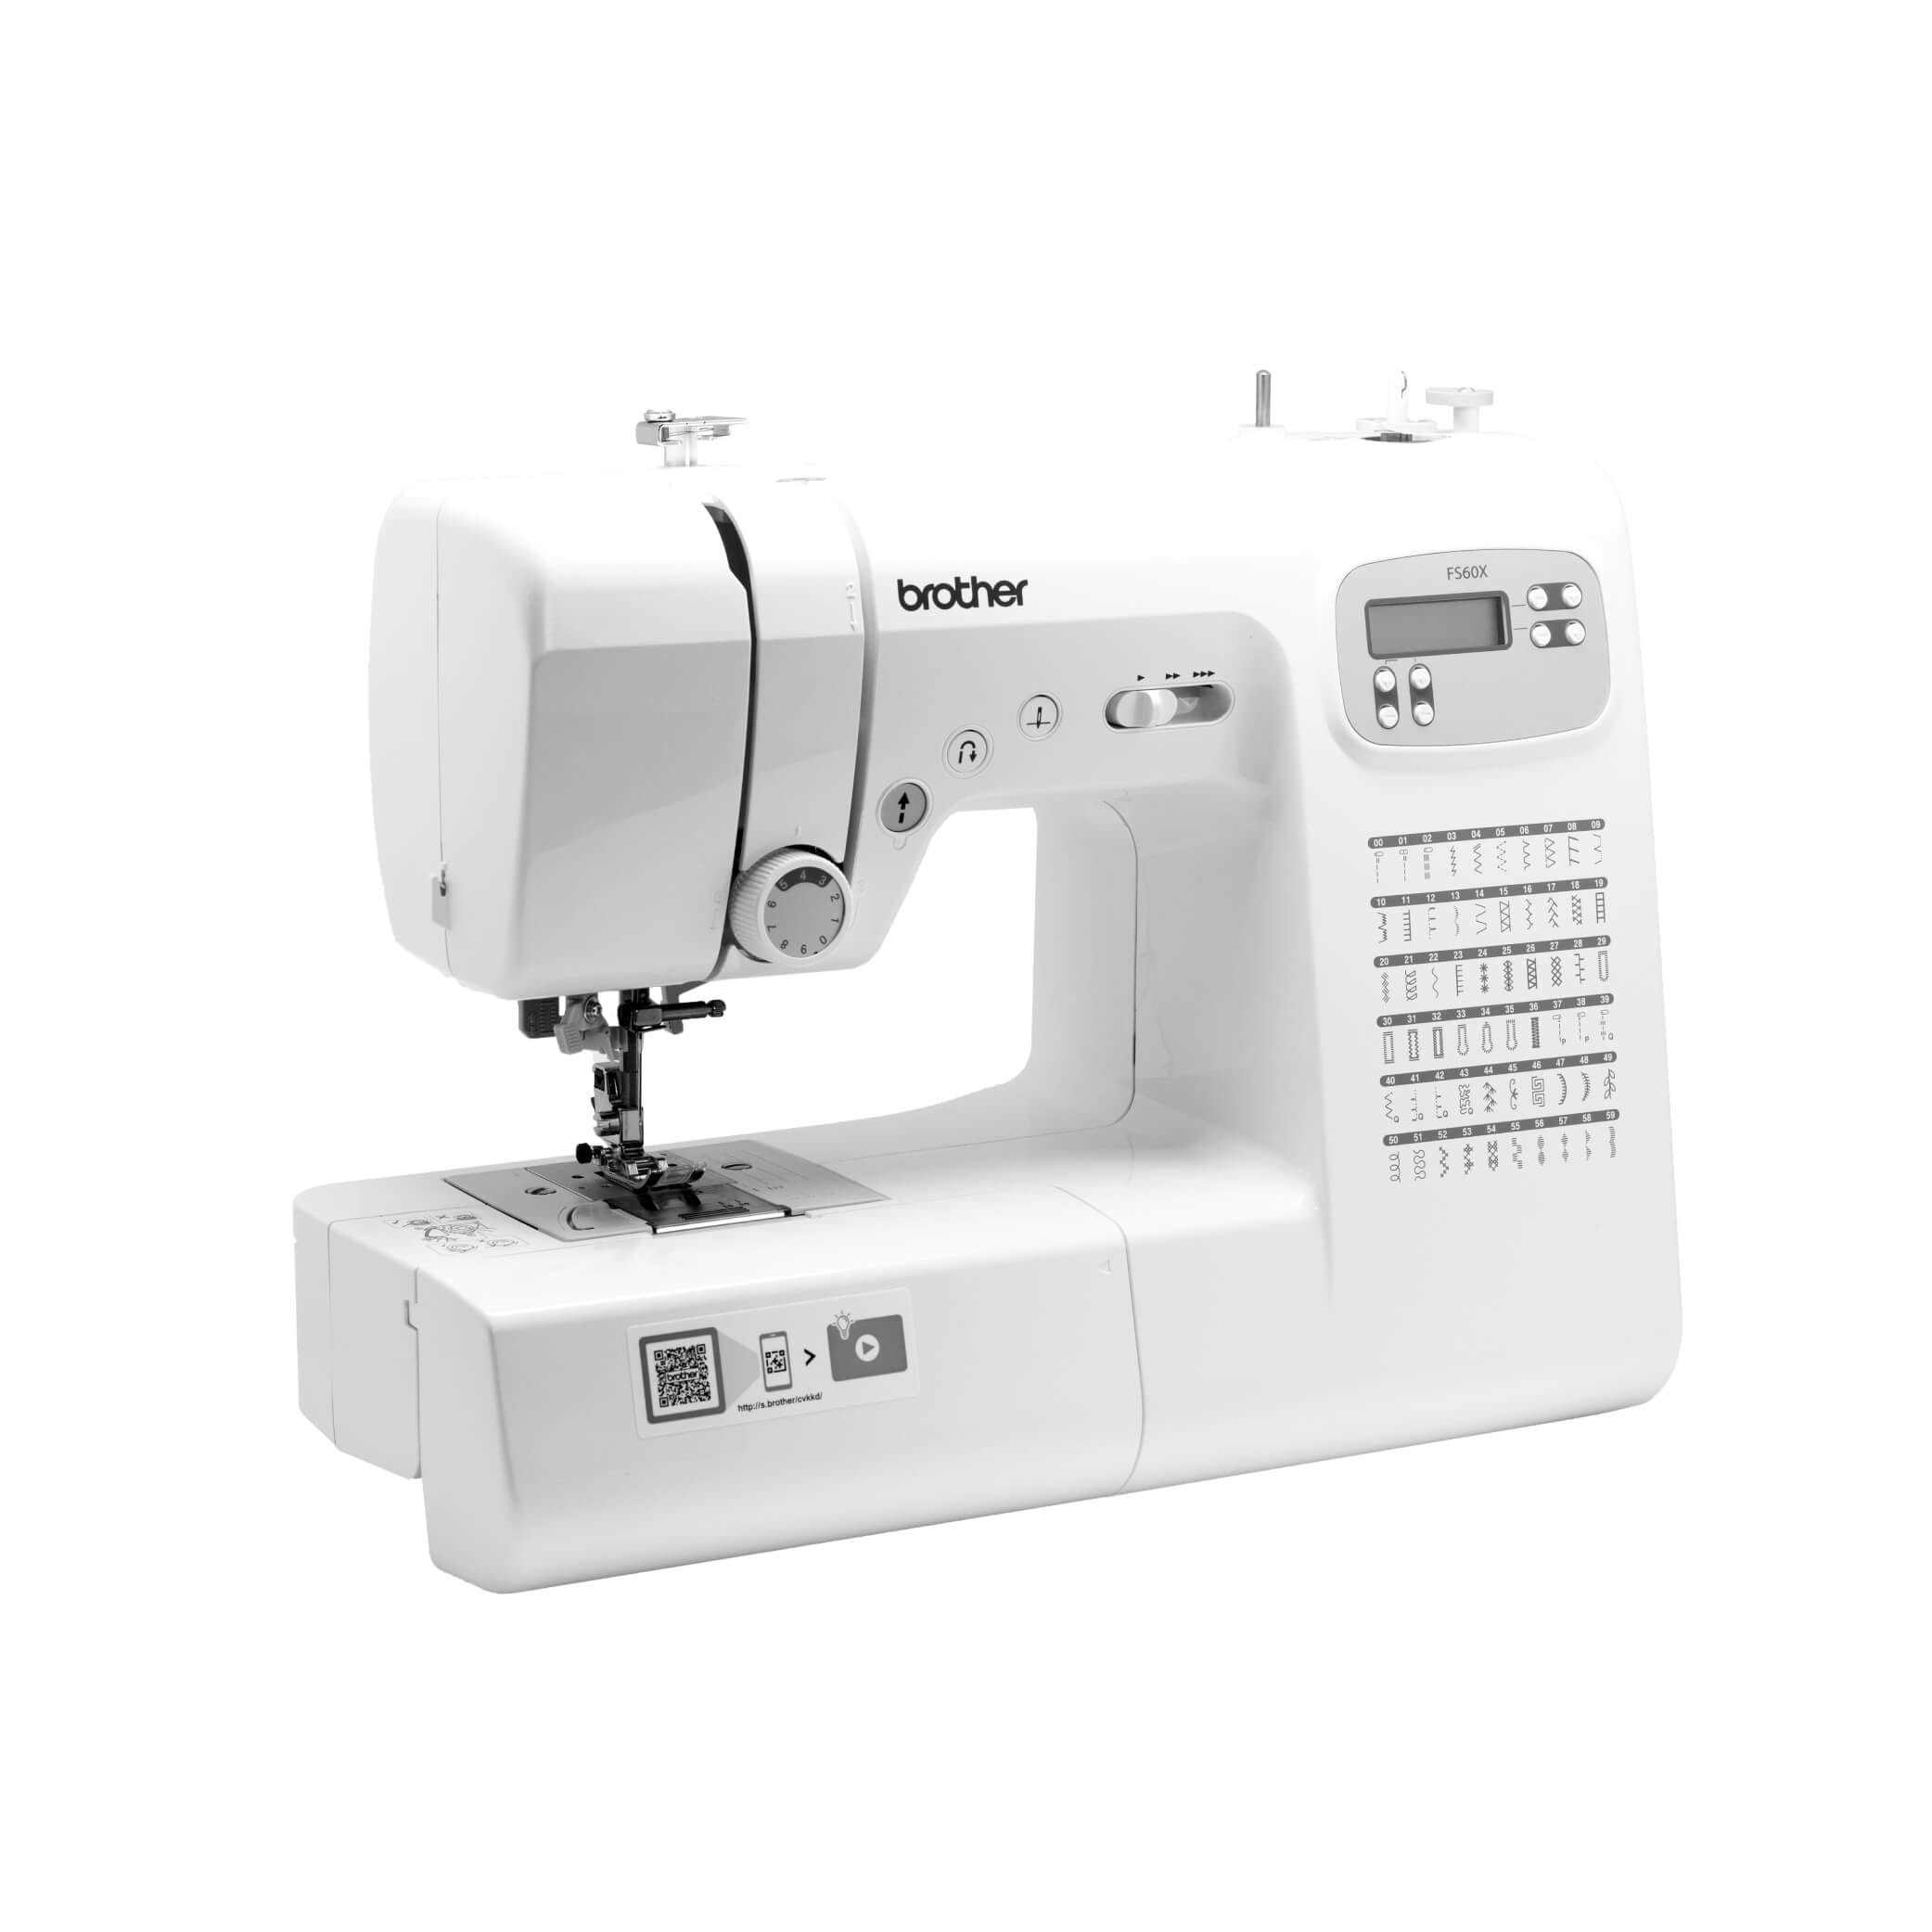 White Sewing Machine Guide (Models, Value, History, Review)